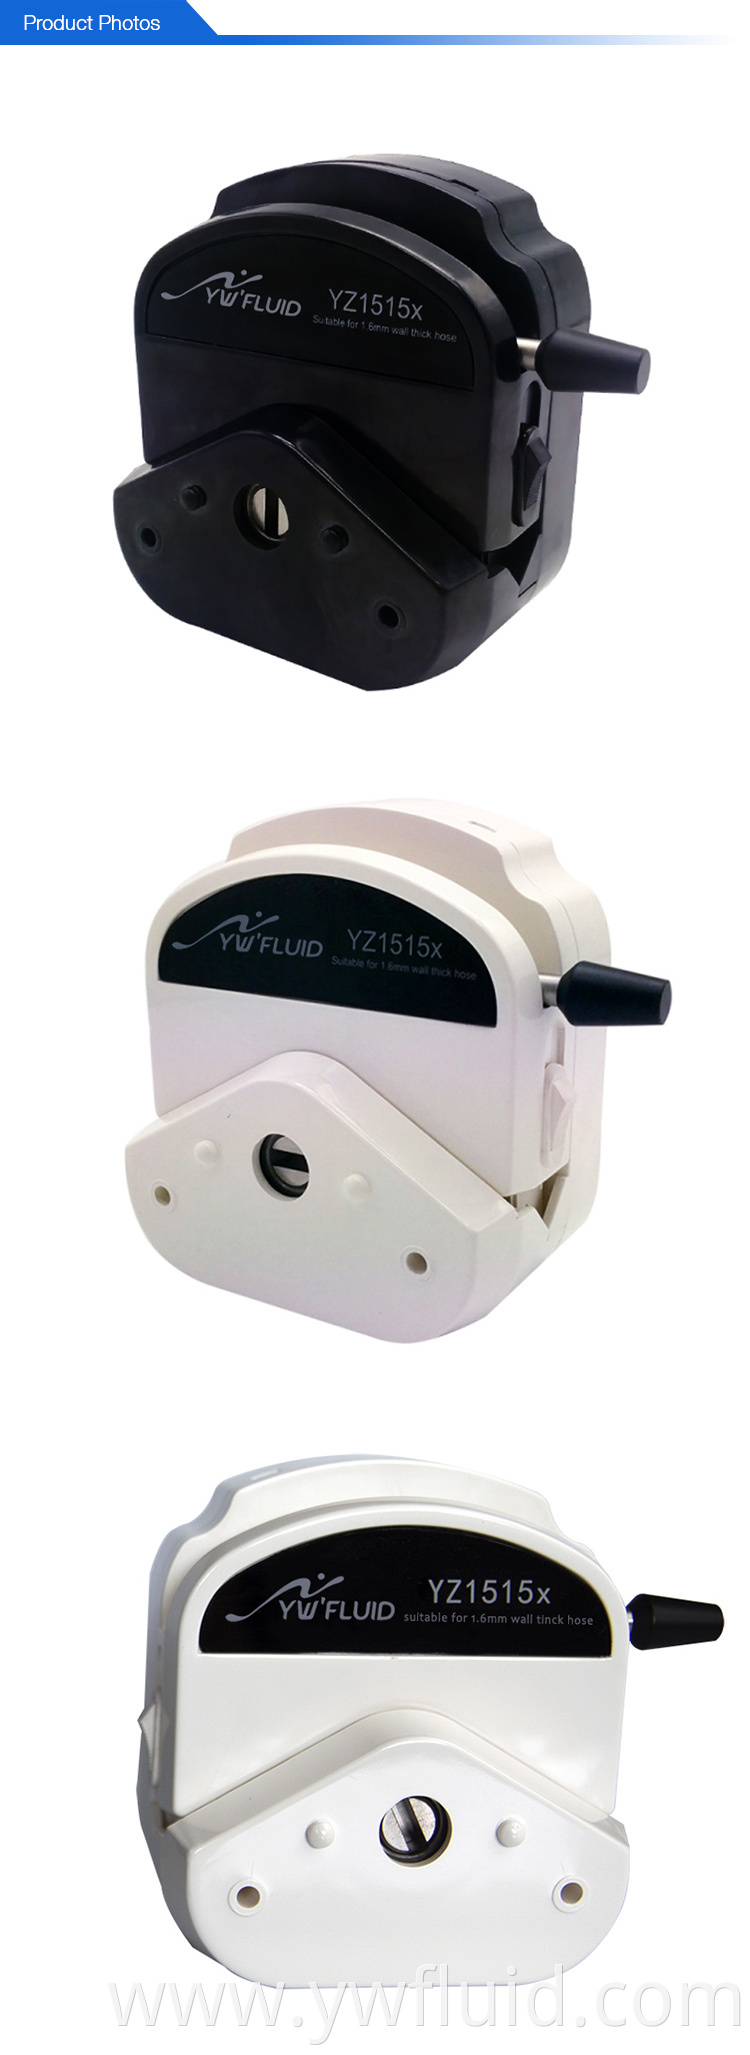 YWfluid automatic tubing retention Pump head peristaltic pump suitable for various sizes of tubing